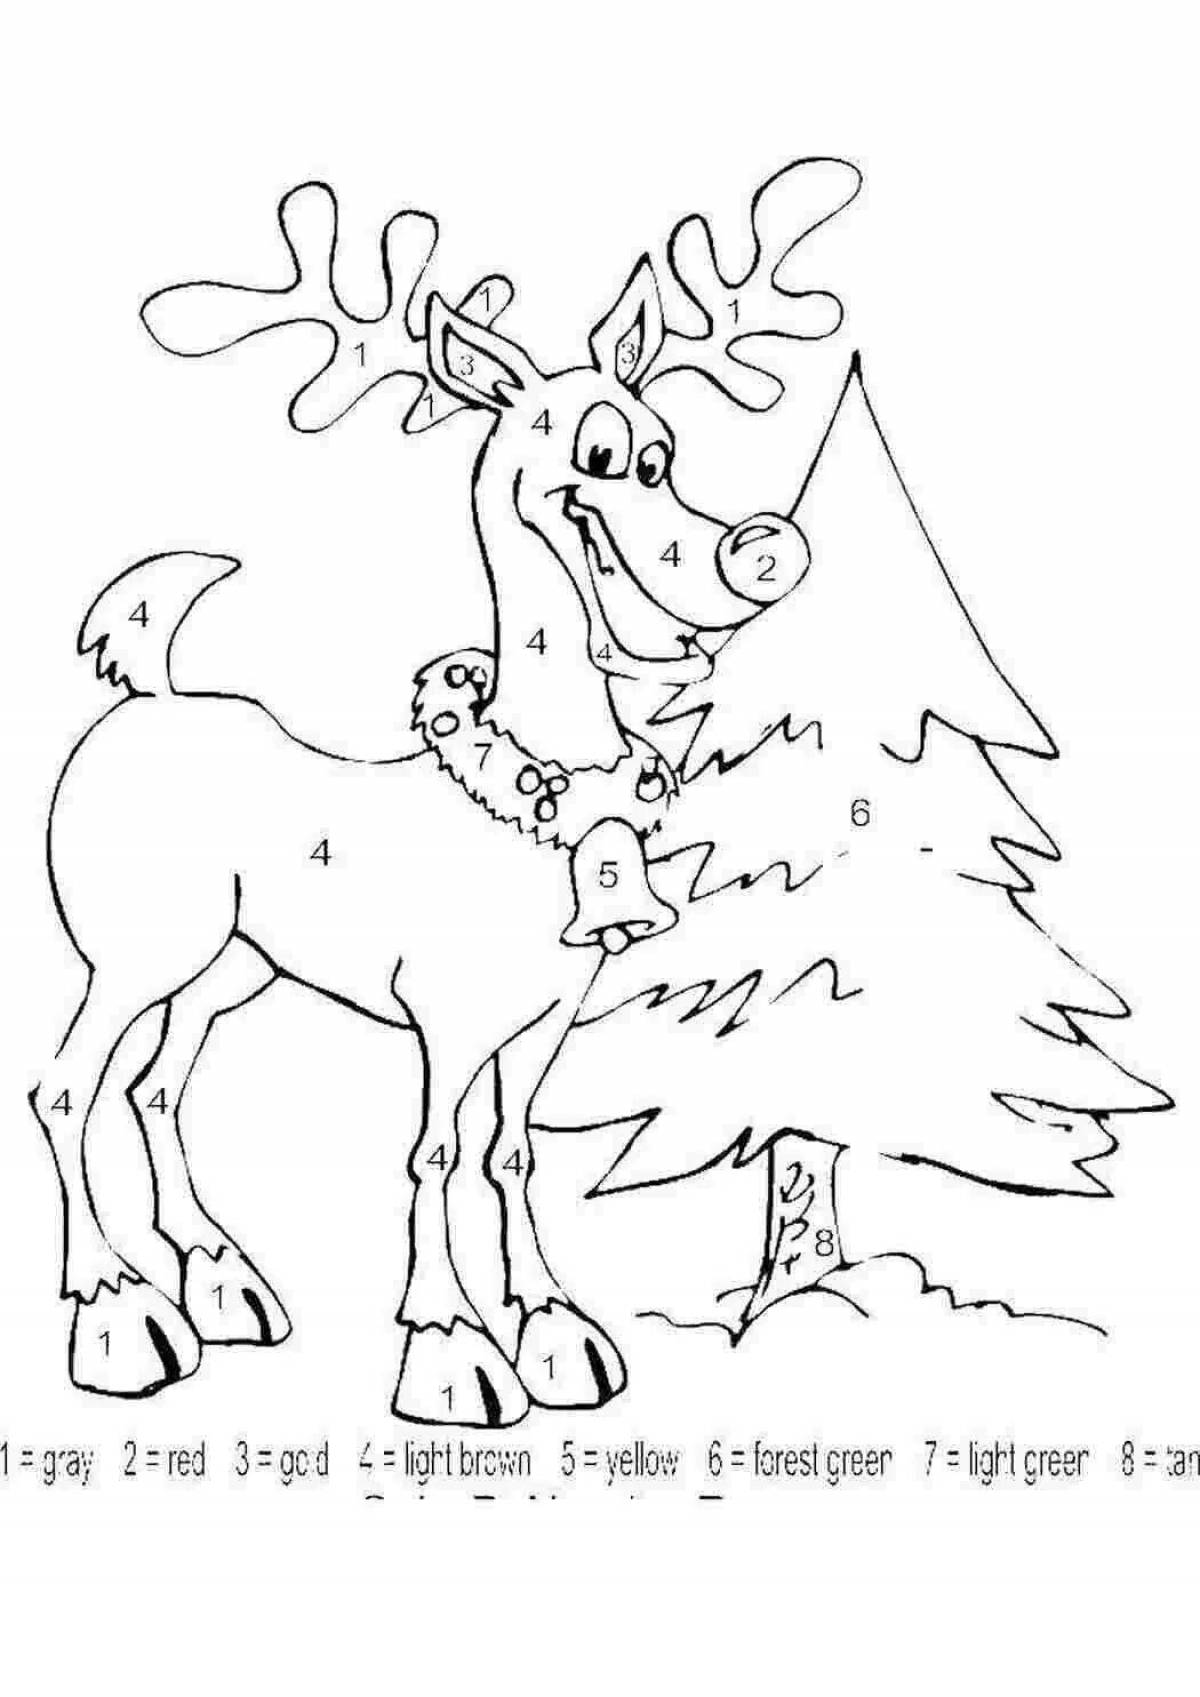 Bright Christmas coloring book